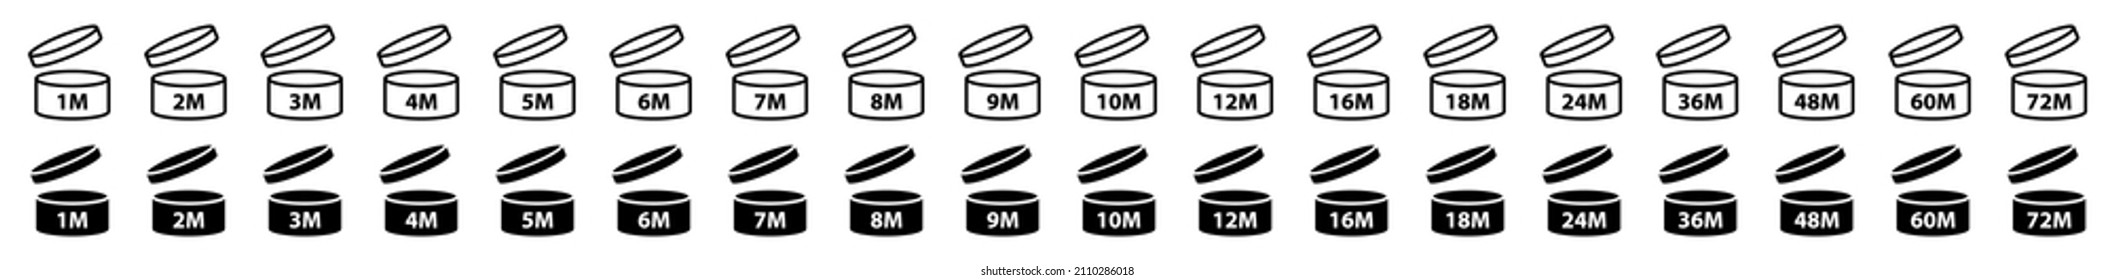 Icons, symbols of cosmetic life period open on shelf. PAO of use date, month, product. Vector marks, labels of 12m, 24m, 6m, 36m, 3m. Best expiry, expiration logo, sign for jar and pot packaging.EPS10